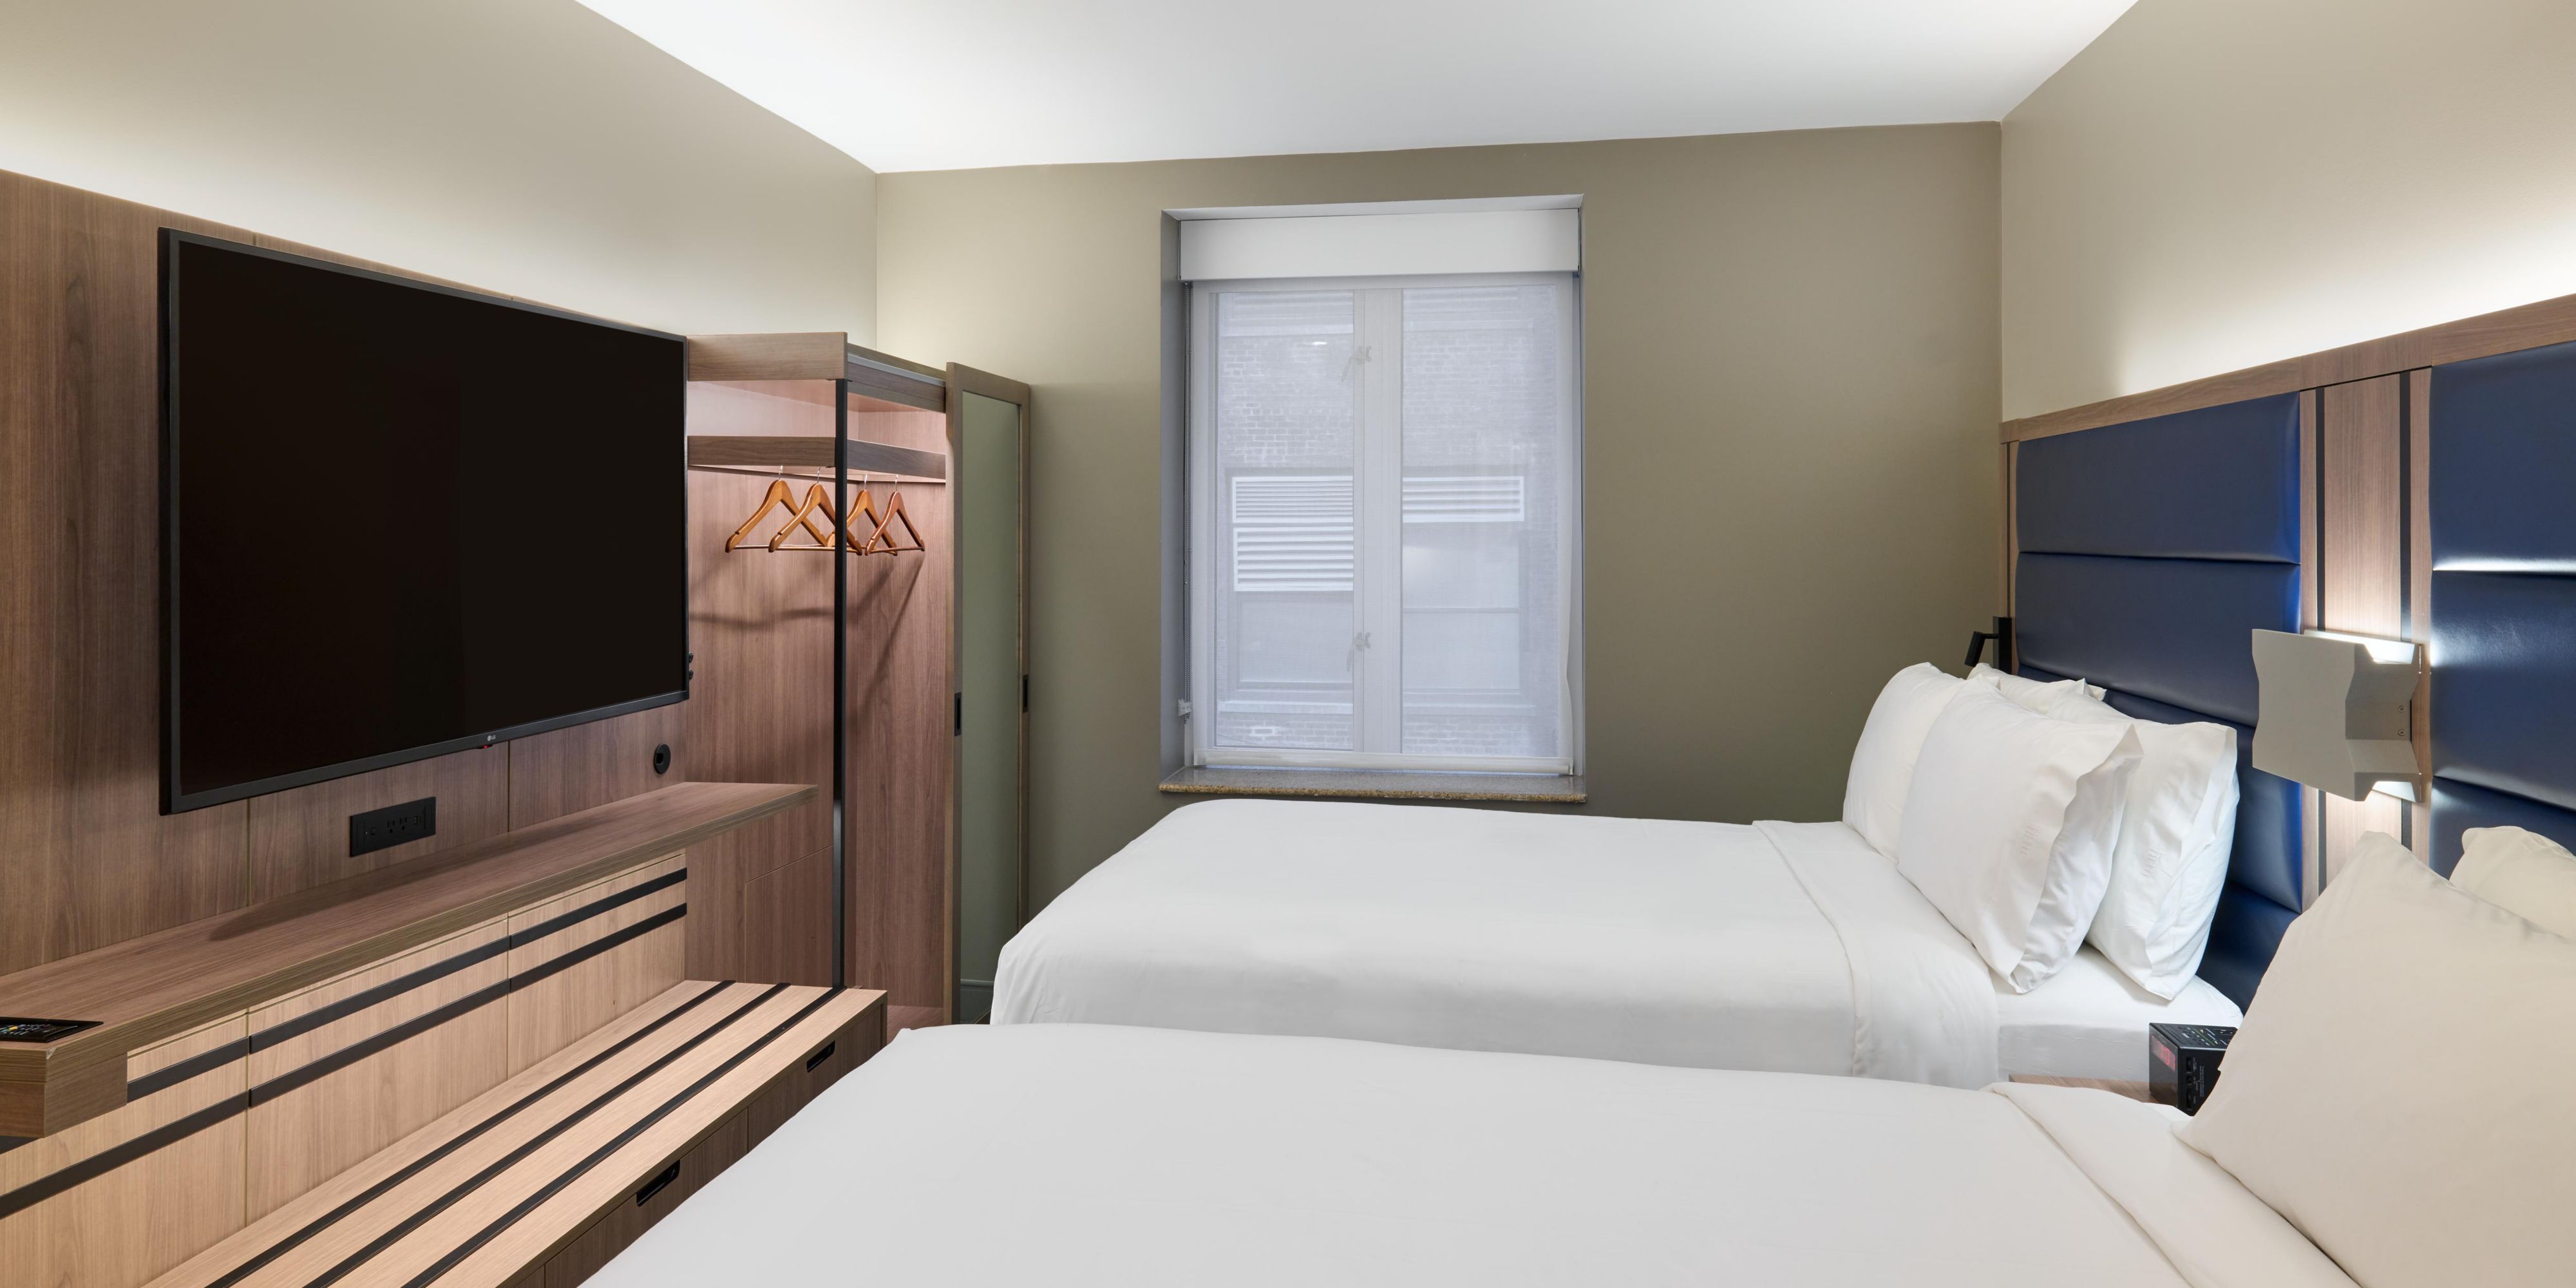 Look for our Ergonomic Flex Space guest rooms when booking. These rooms have a contemporary open-concept feel with either King or Two Full beds. Reserve yours today!